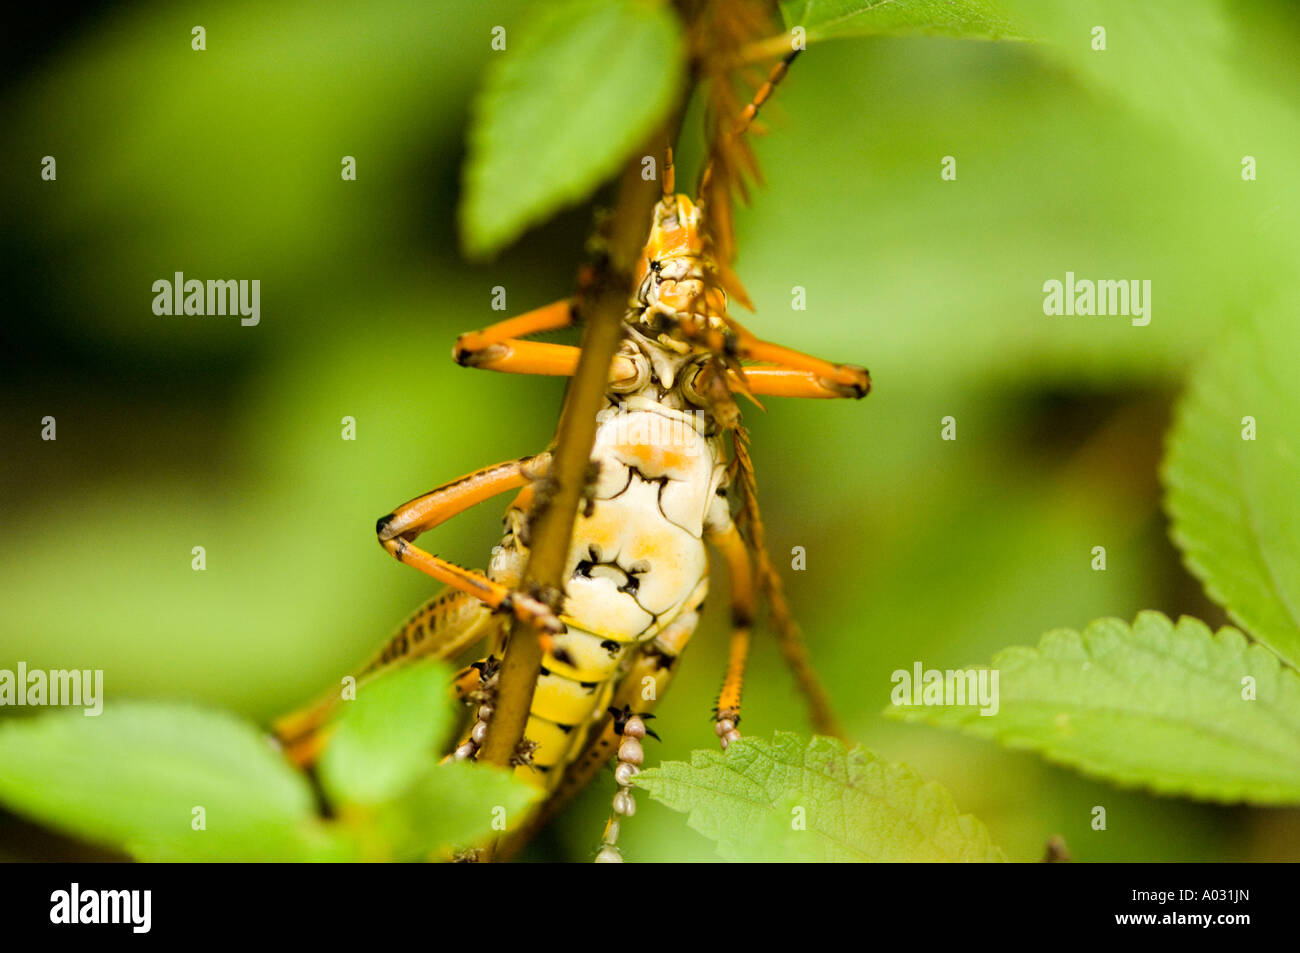 Underbelly of a lubber grasshopper on a branch in the Florida Everglades, USA. Stock Photo